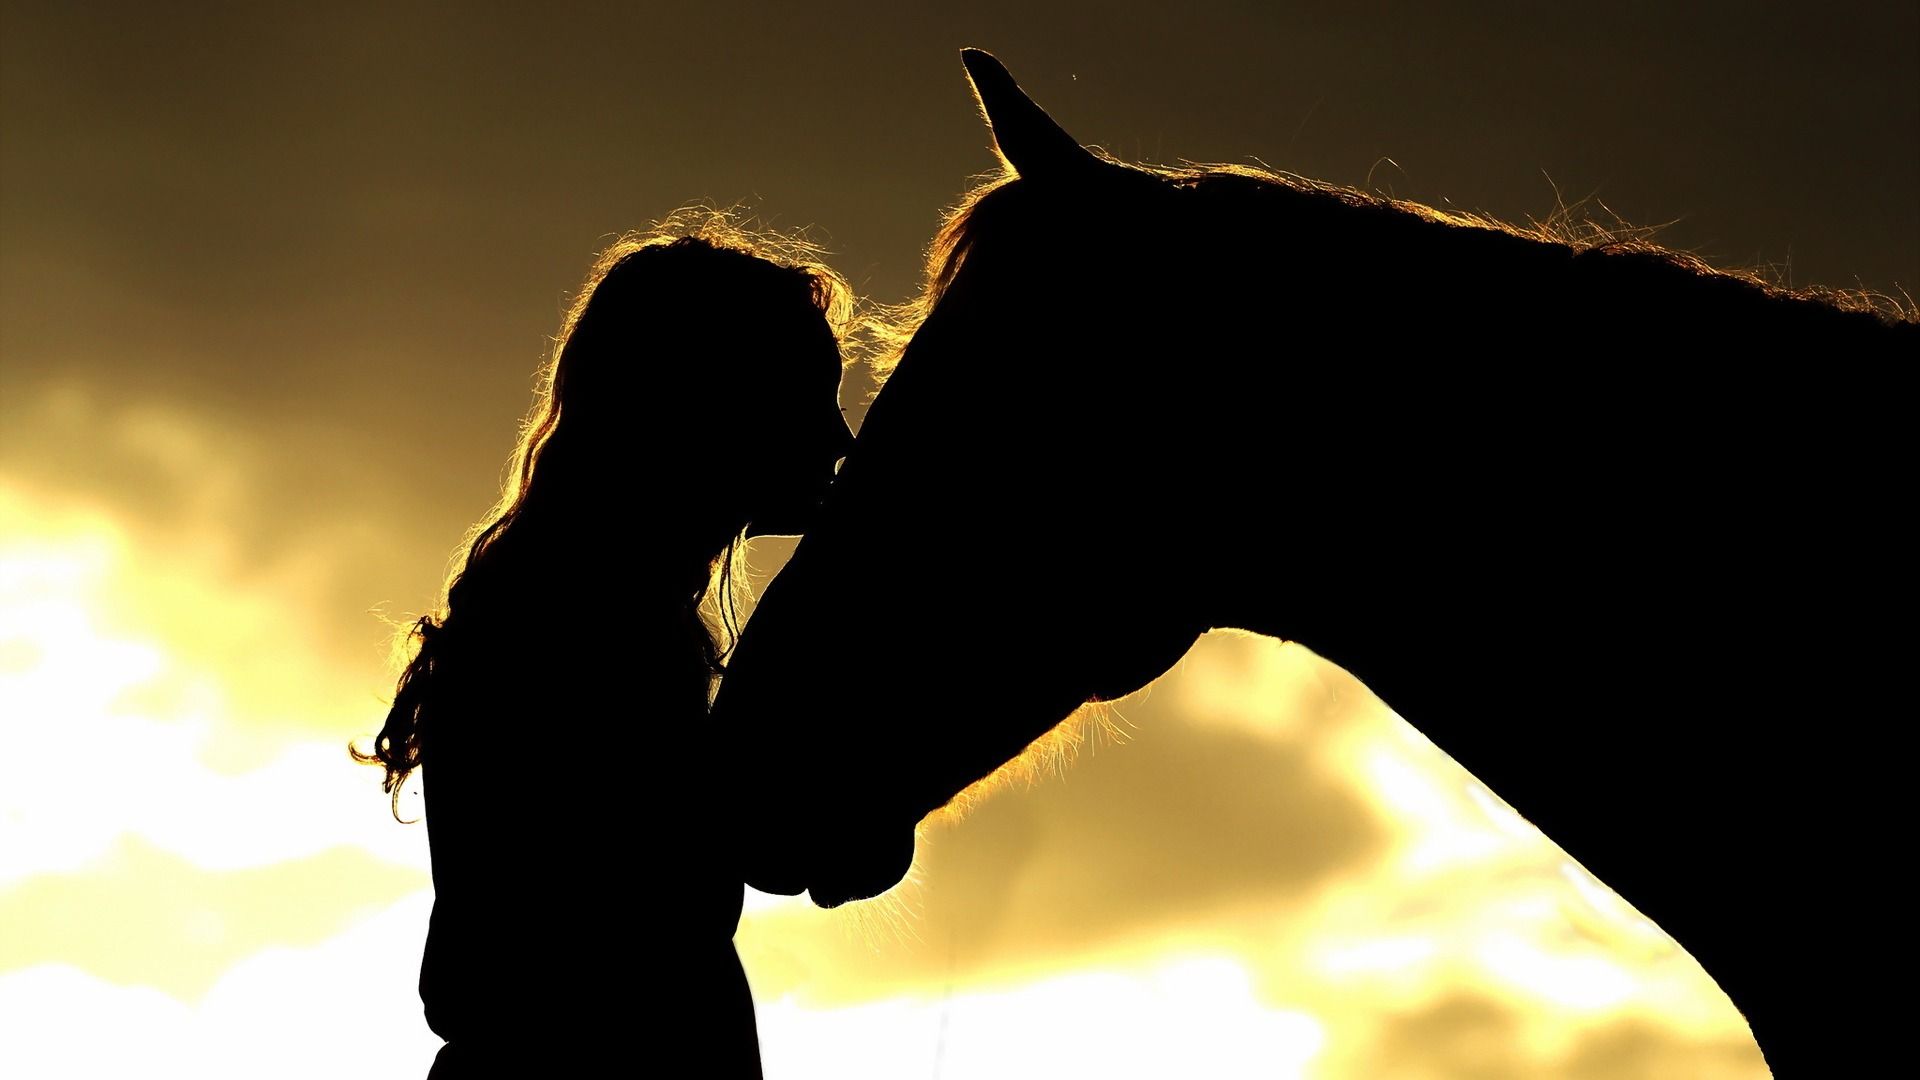 Download wallpaper girl horse silhouettes, mood resolution